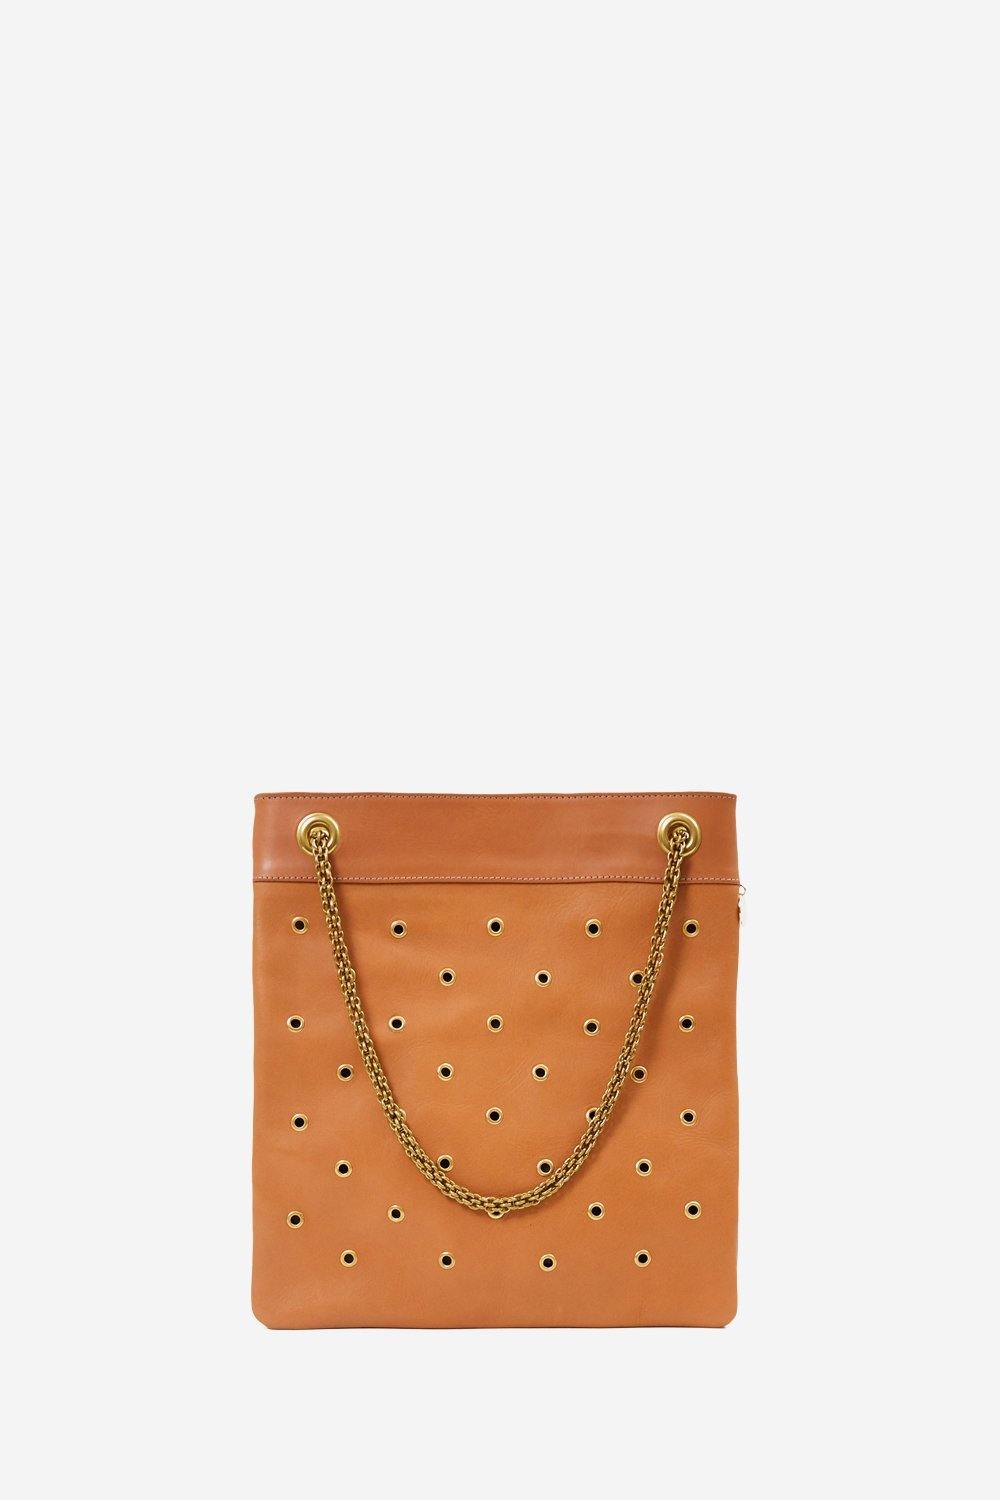 Clare V Bags | Shop The Latest Women's Handbags | The Standard Store ...